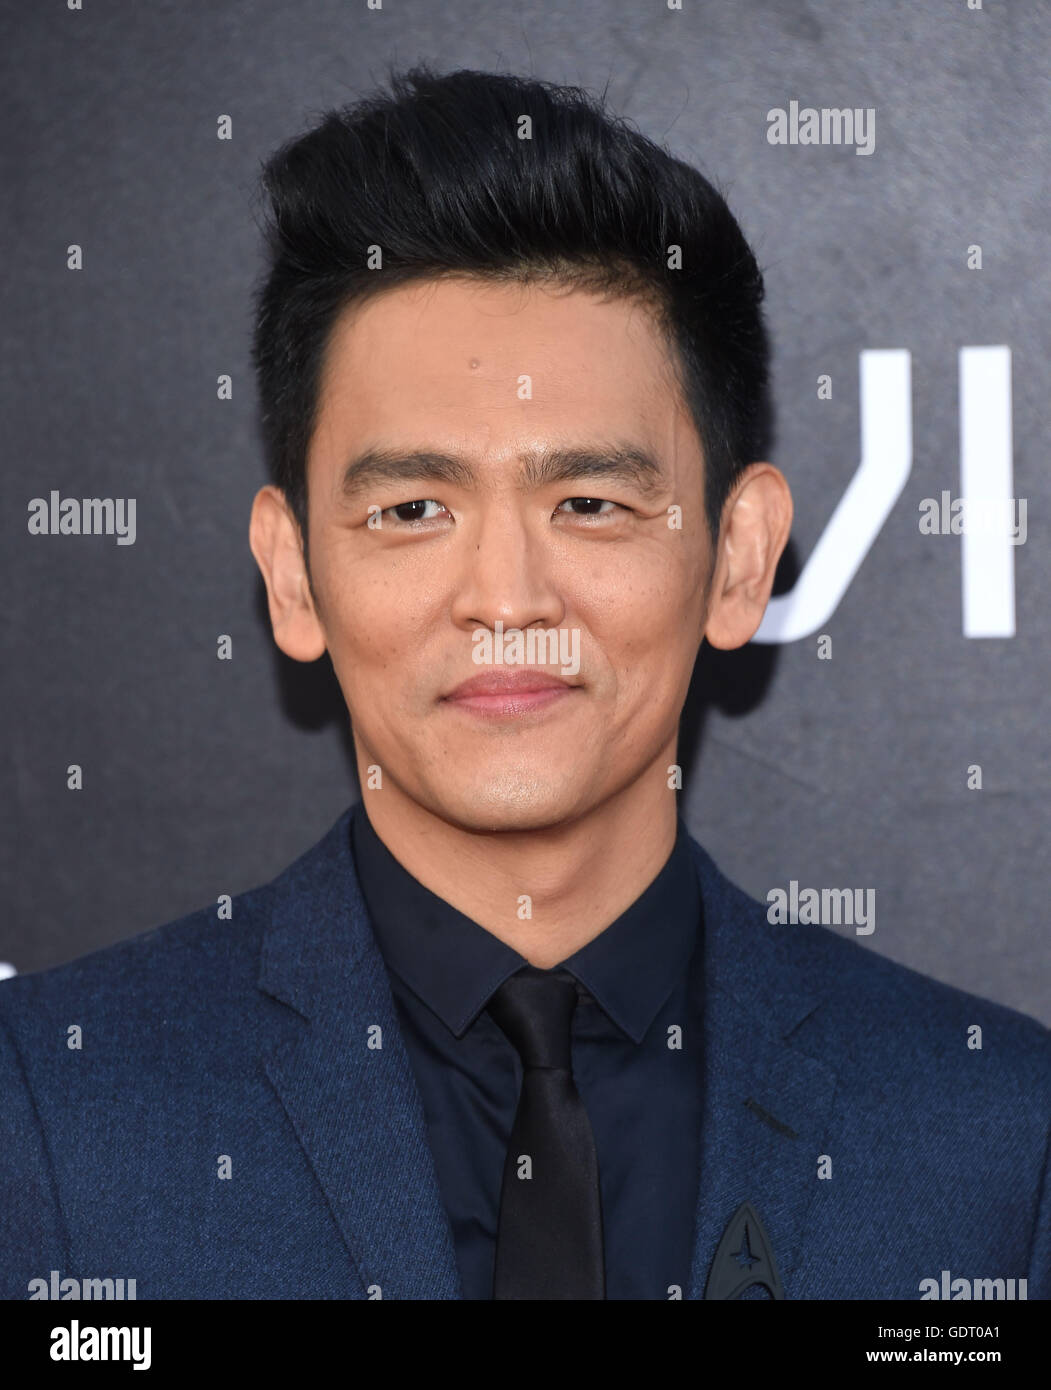 San Diego, California, USA. 20th July, 2016. John Cho arrives for the premiere of the film 'Star Trek Beyond' at the Embarcadero Marina Park. Credit:  Lisa O'Connor/ZUMA Wire/Alamy Live News Stock Photo